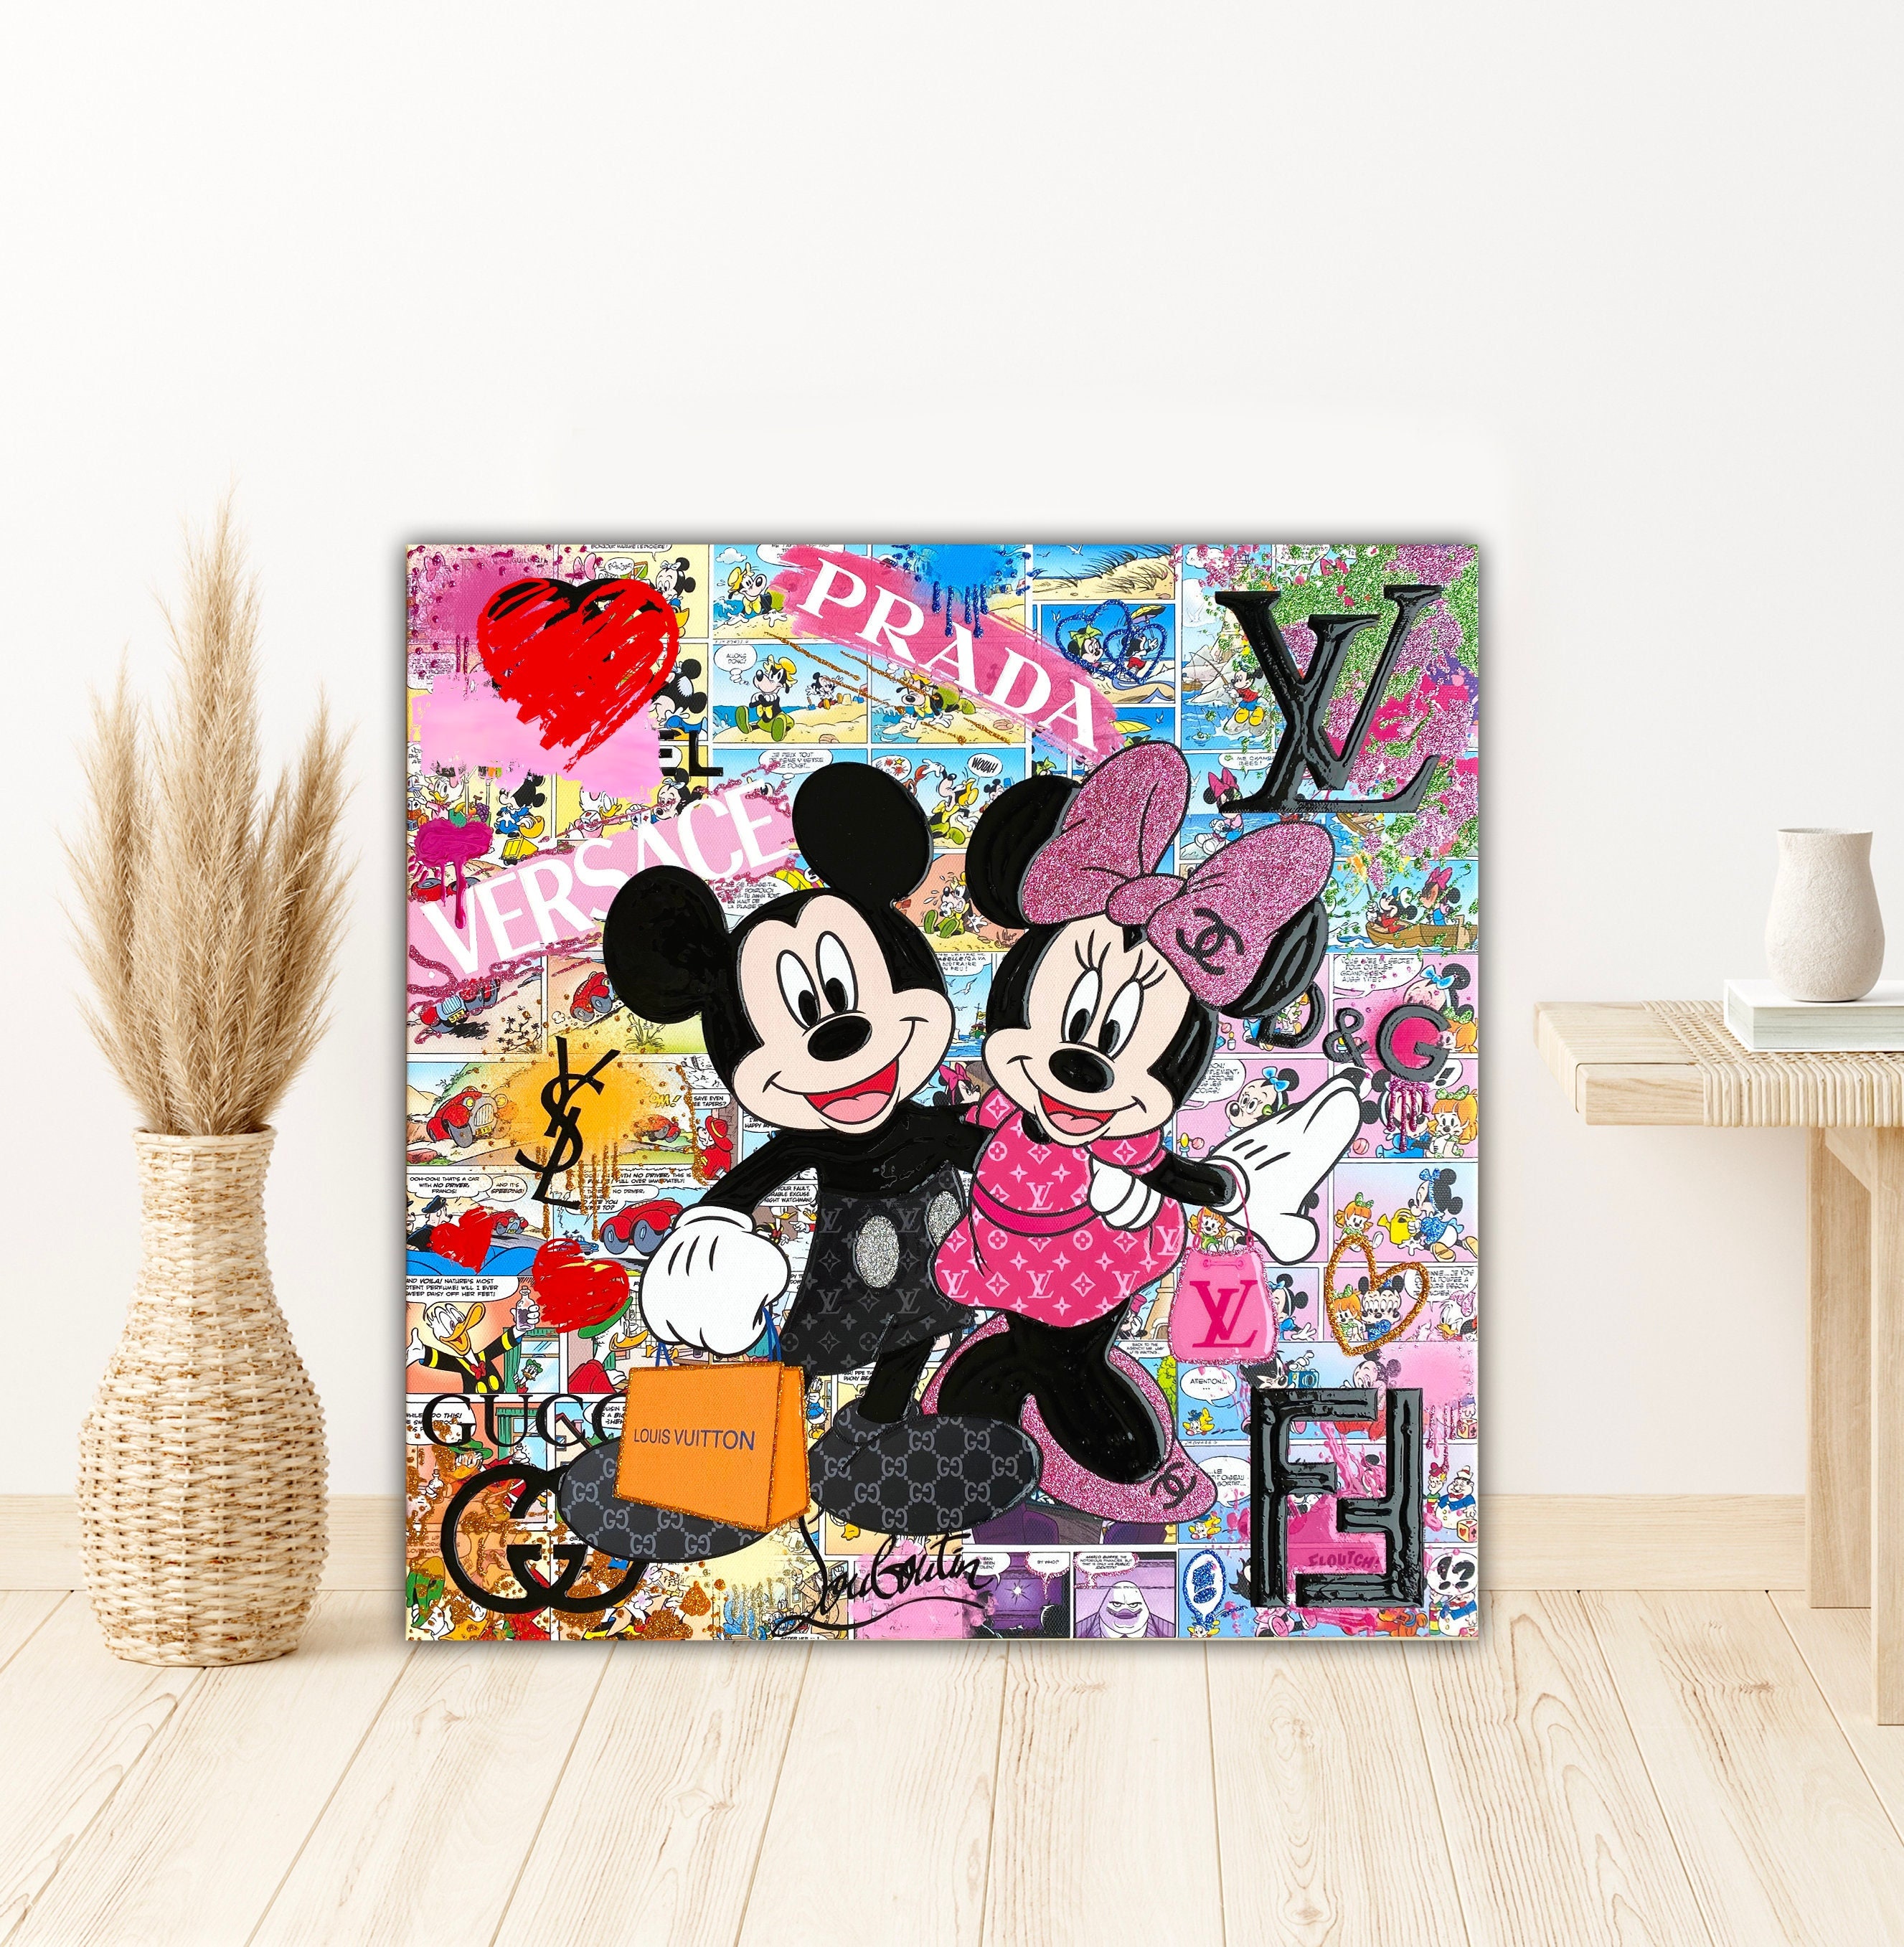 Louis Vuitton fabric with Mickey and Minnie Mouse pattern